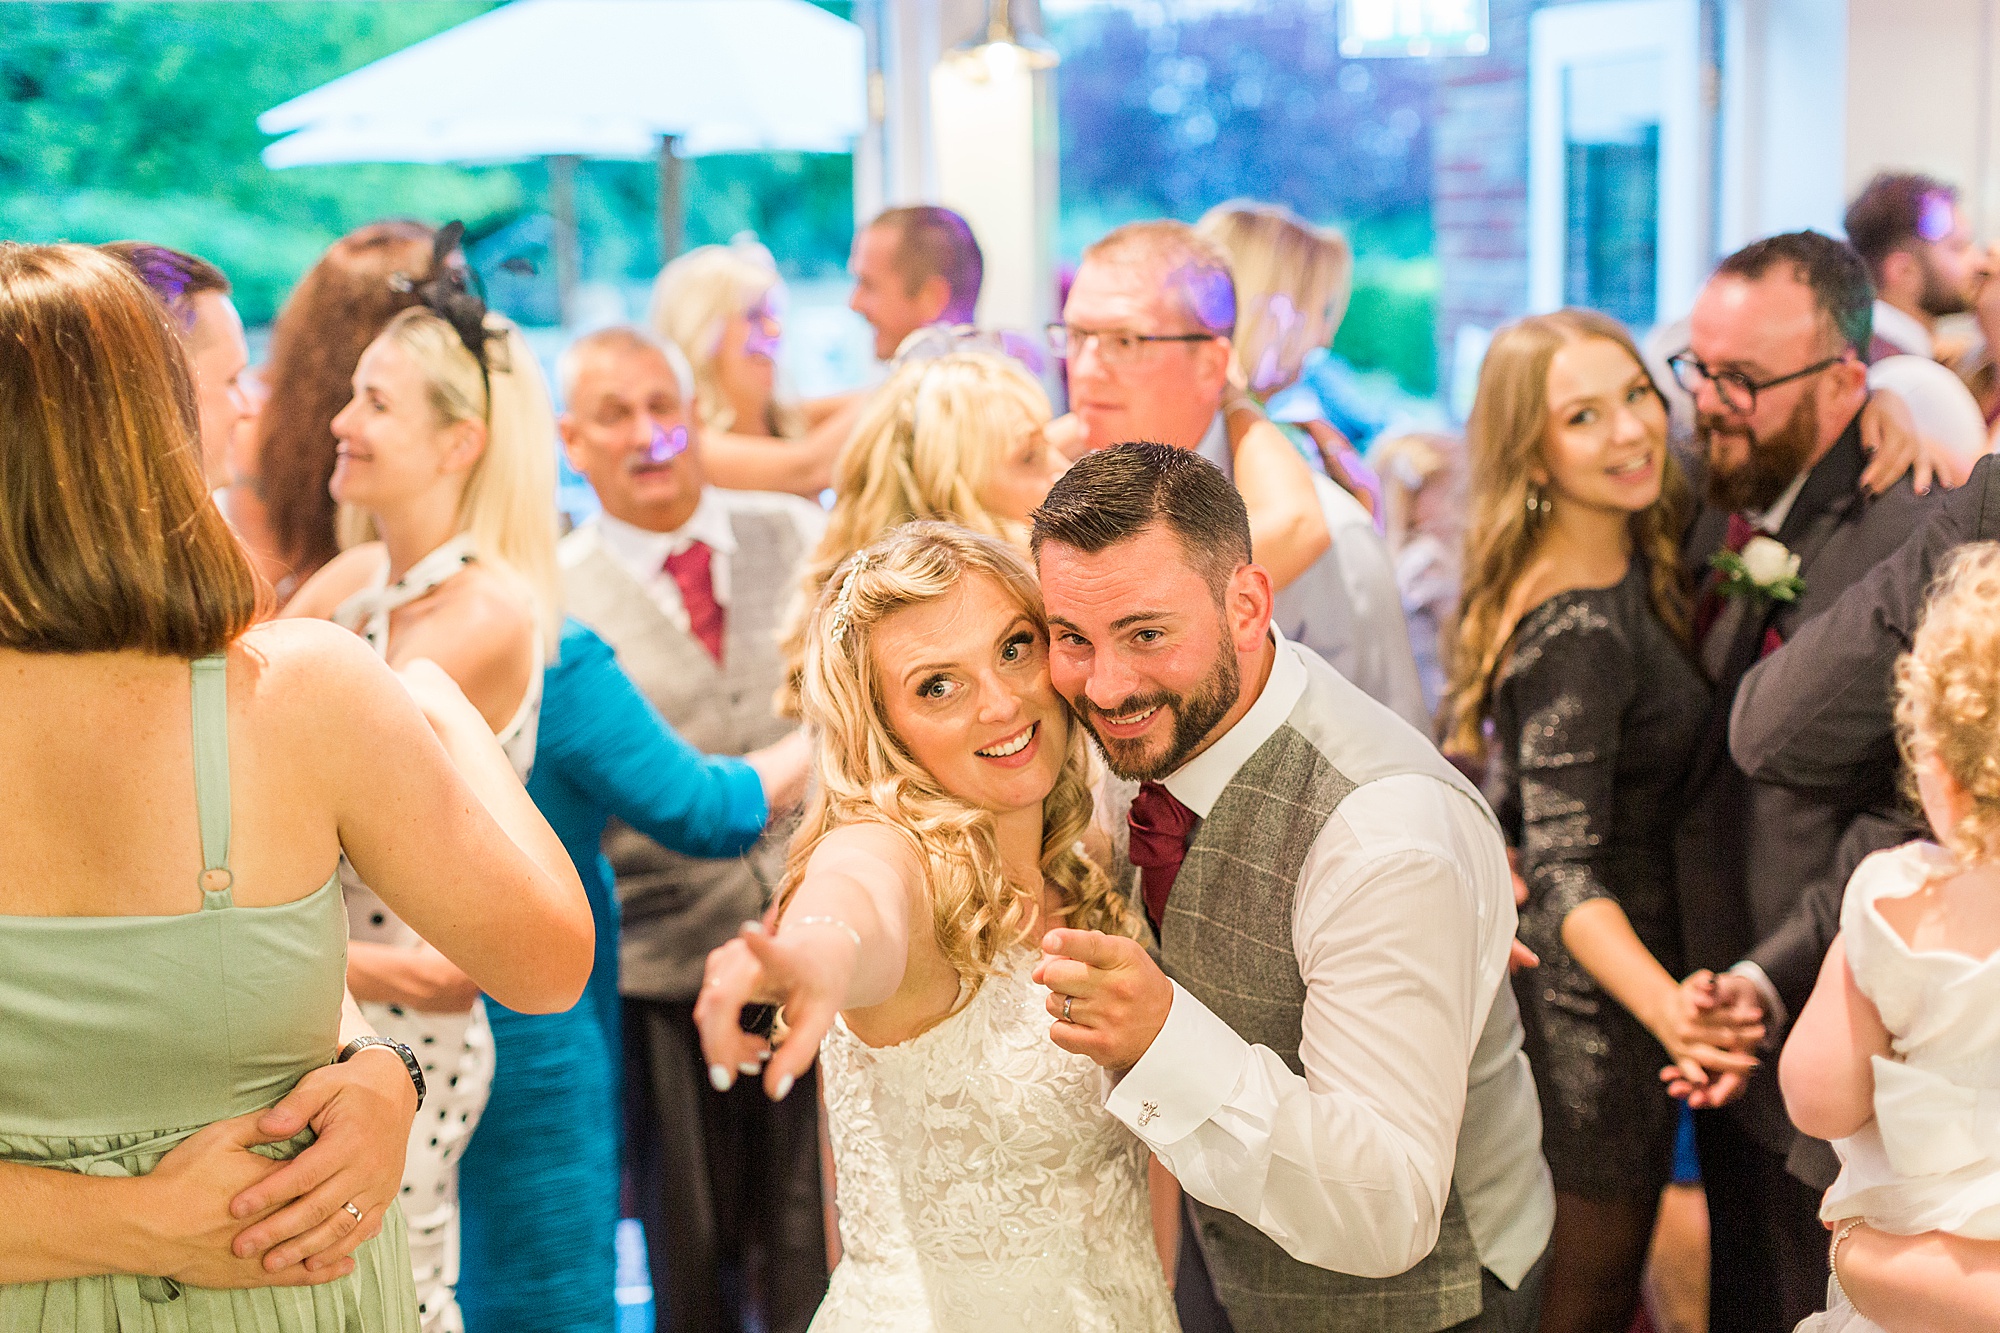 image shows guests dancing and singing at a wedding reception in the evening including a bride and groom pointing to another guest to come and dance